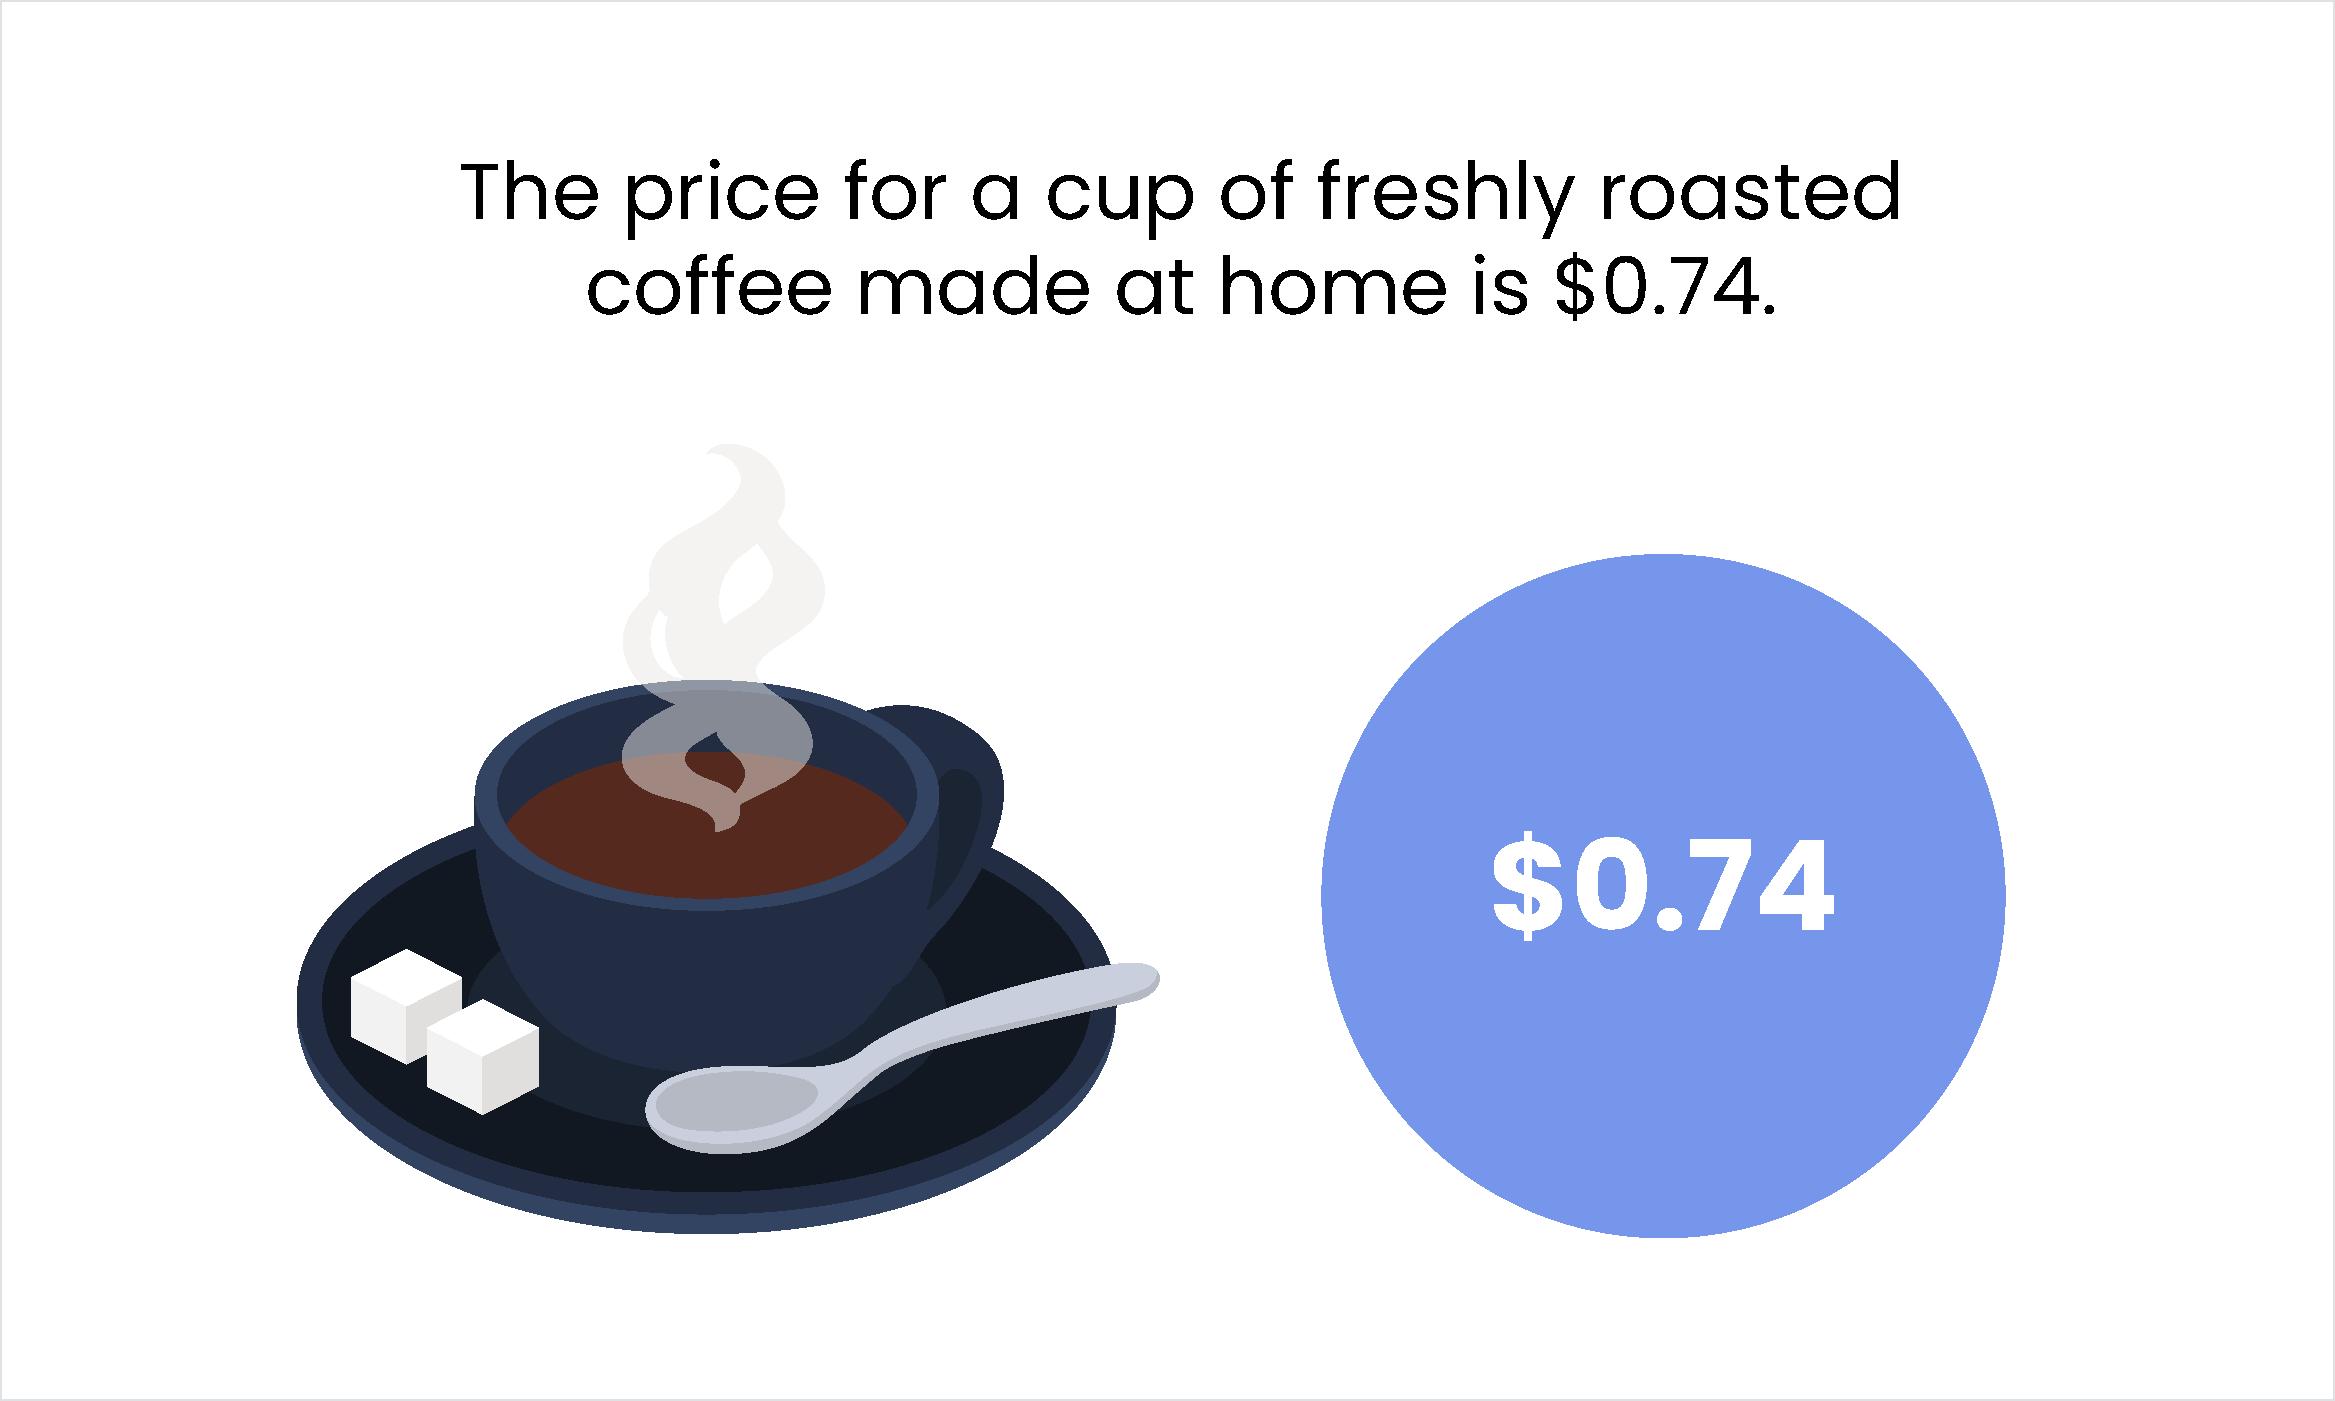 The price for a cup of freshly roasted coffee made at home is $0.74